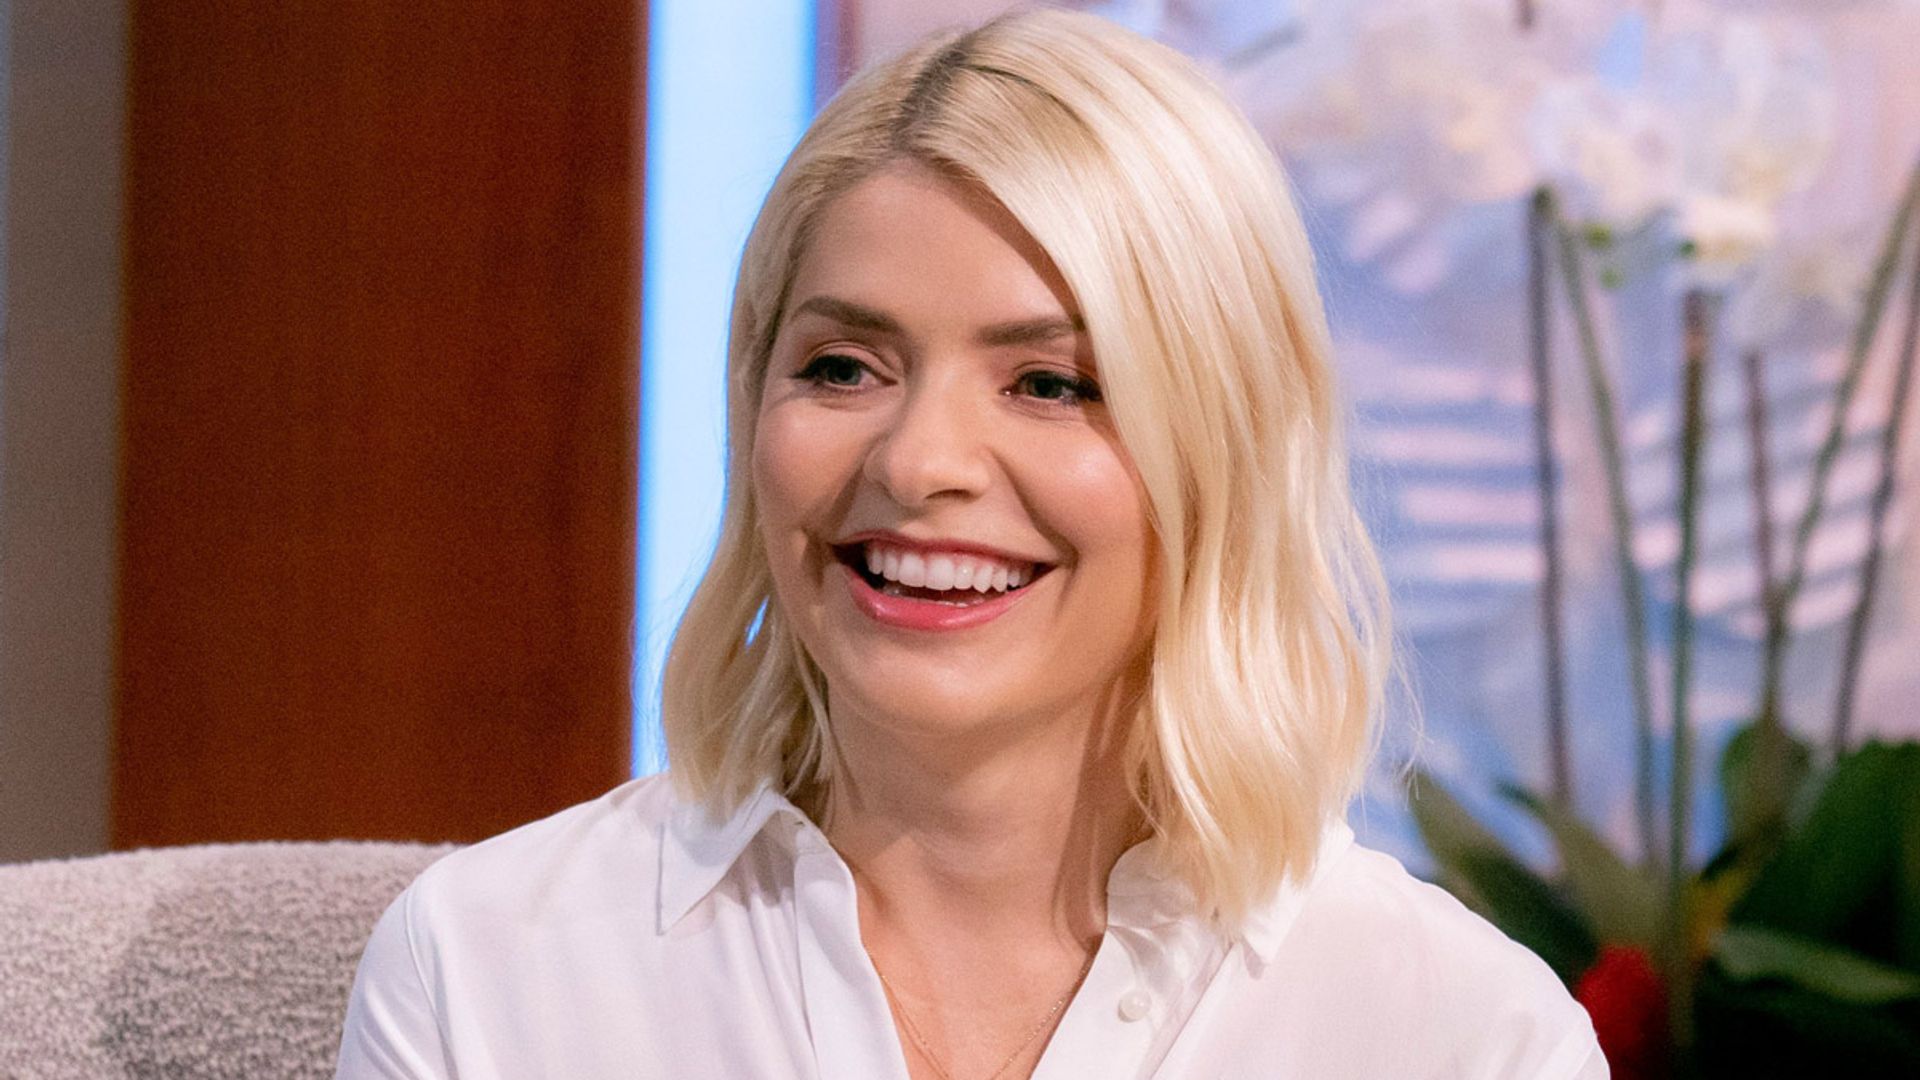 Holly Willoughby stuns fans with unusual household hack: 'Just call me genius!'